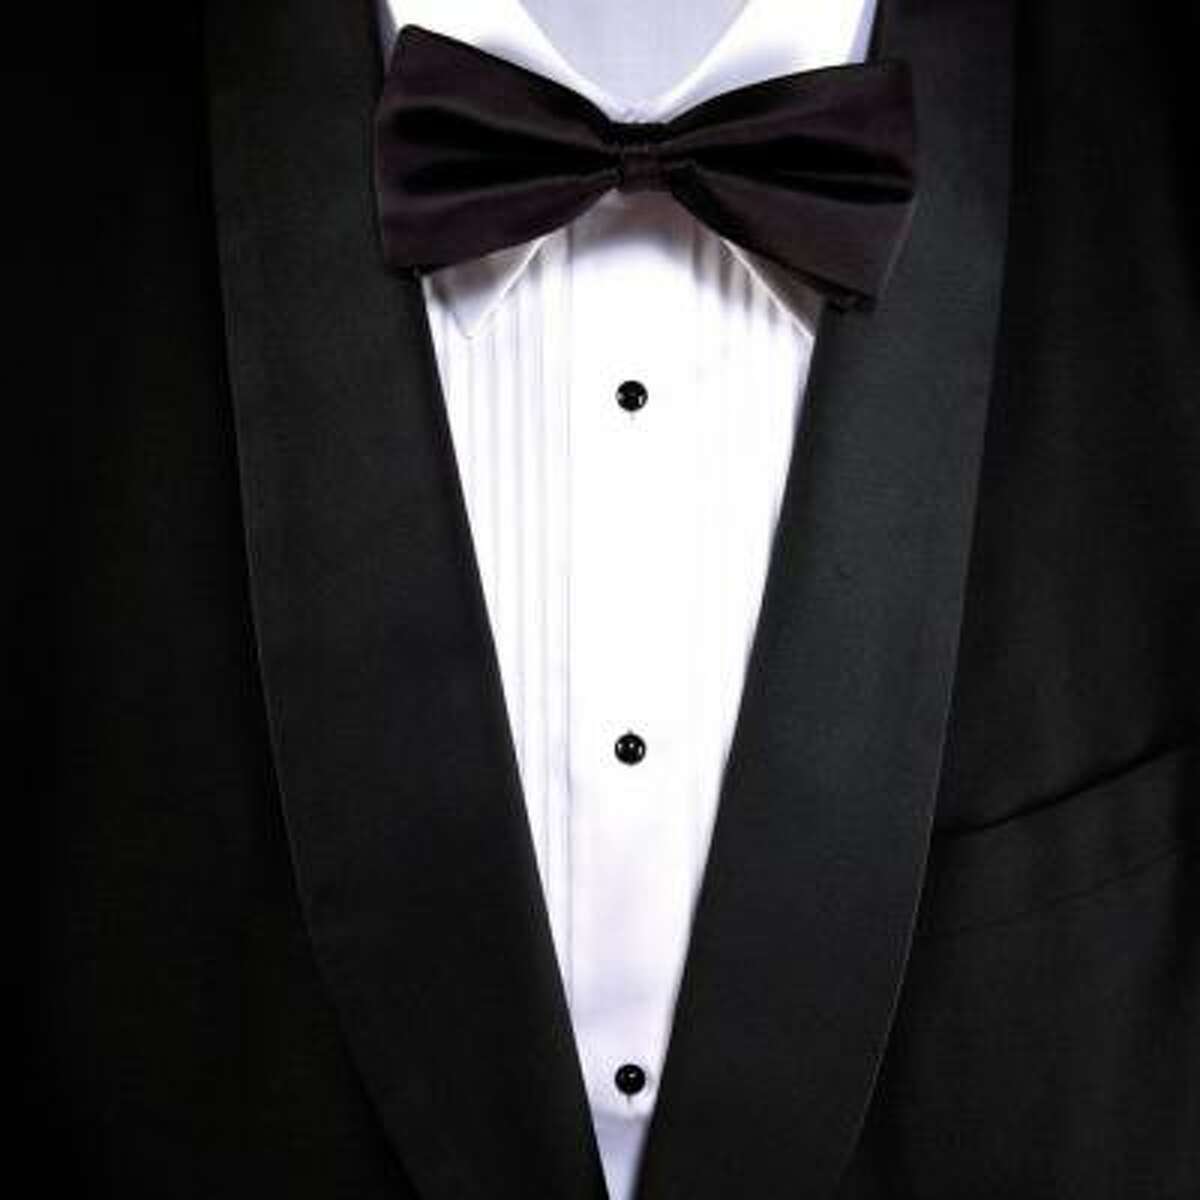 To tux or not: More classical performers forgo traditional formal attire